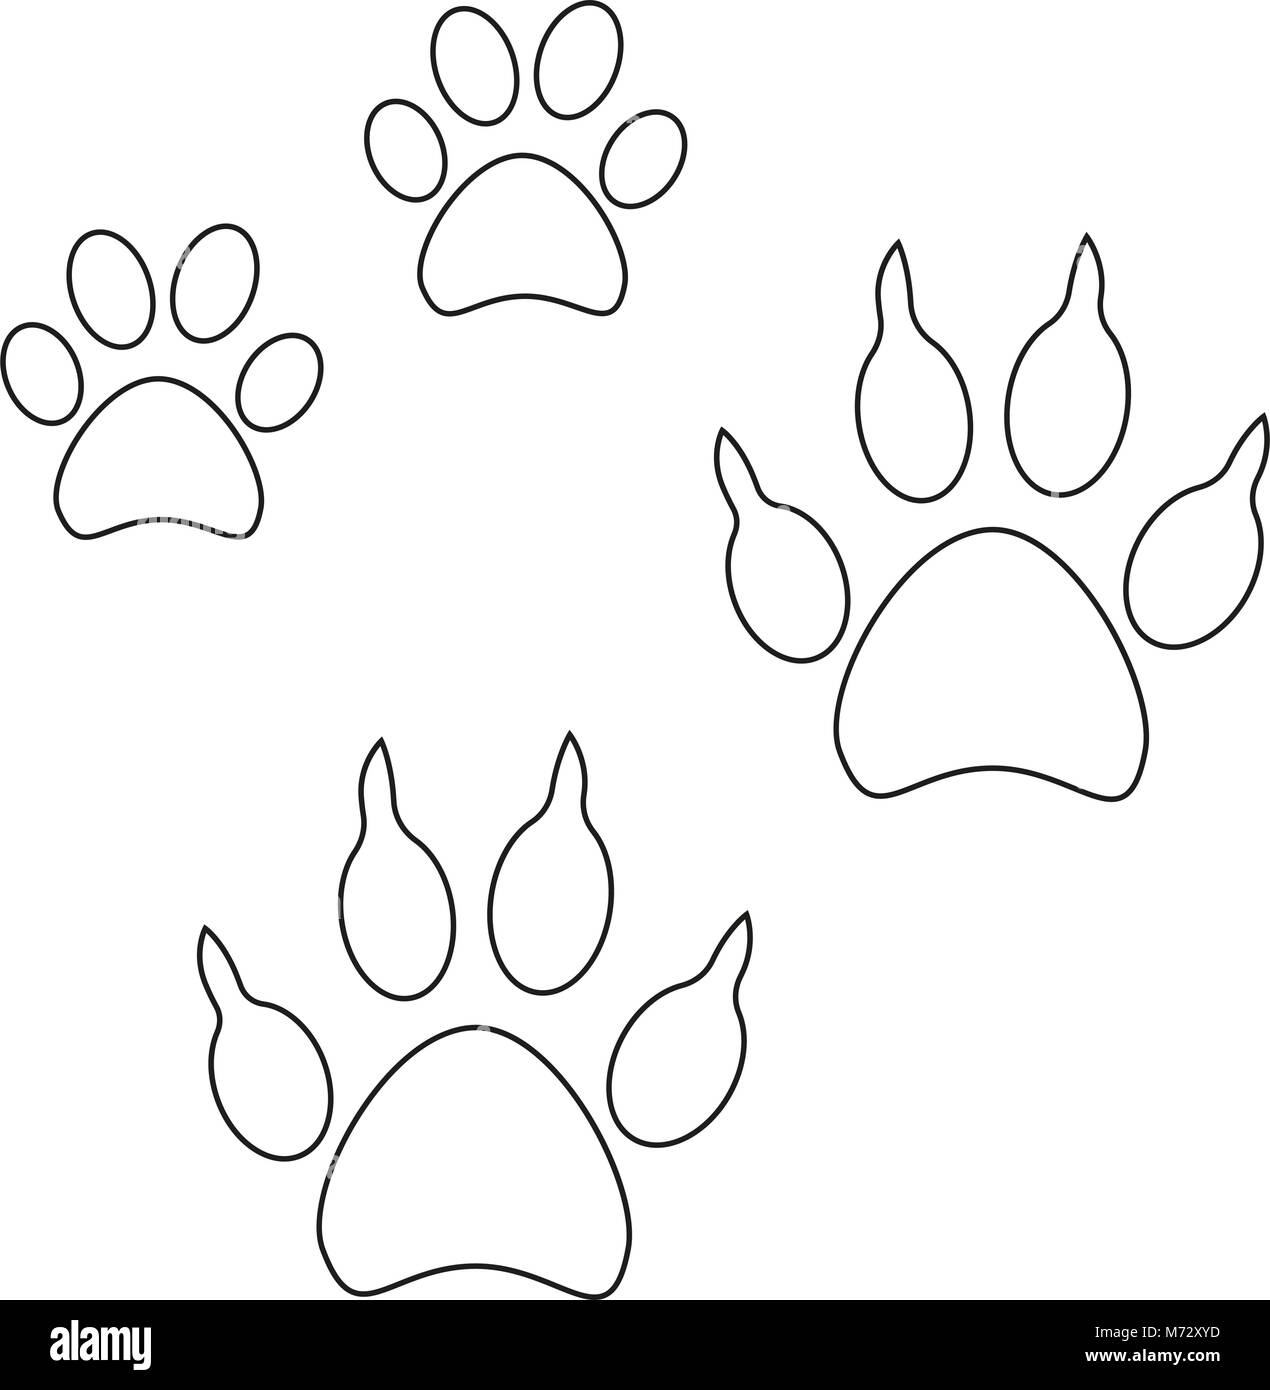 Line art cat dog paw footprint icon set poster. Black and white vector illustration for gift card, flyer, certificate or banner, icon, logo, patch, st Stock Vector